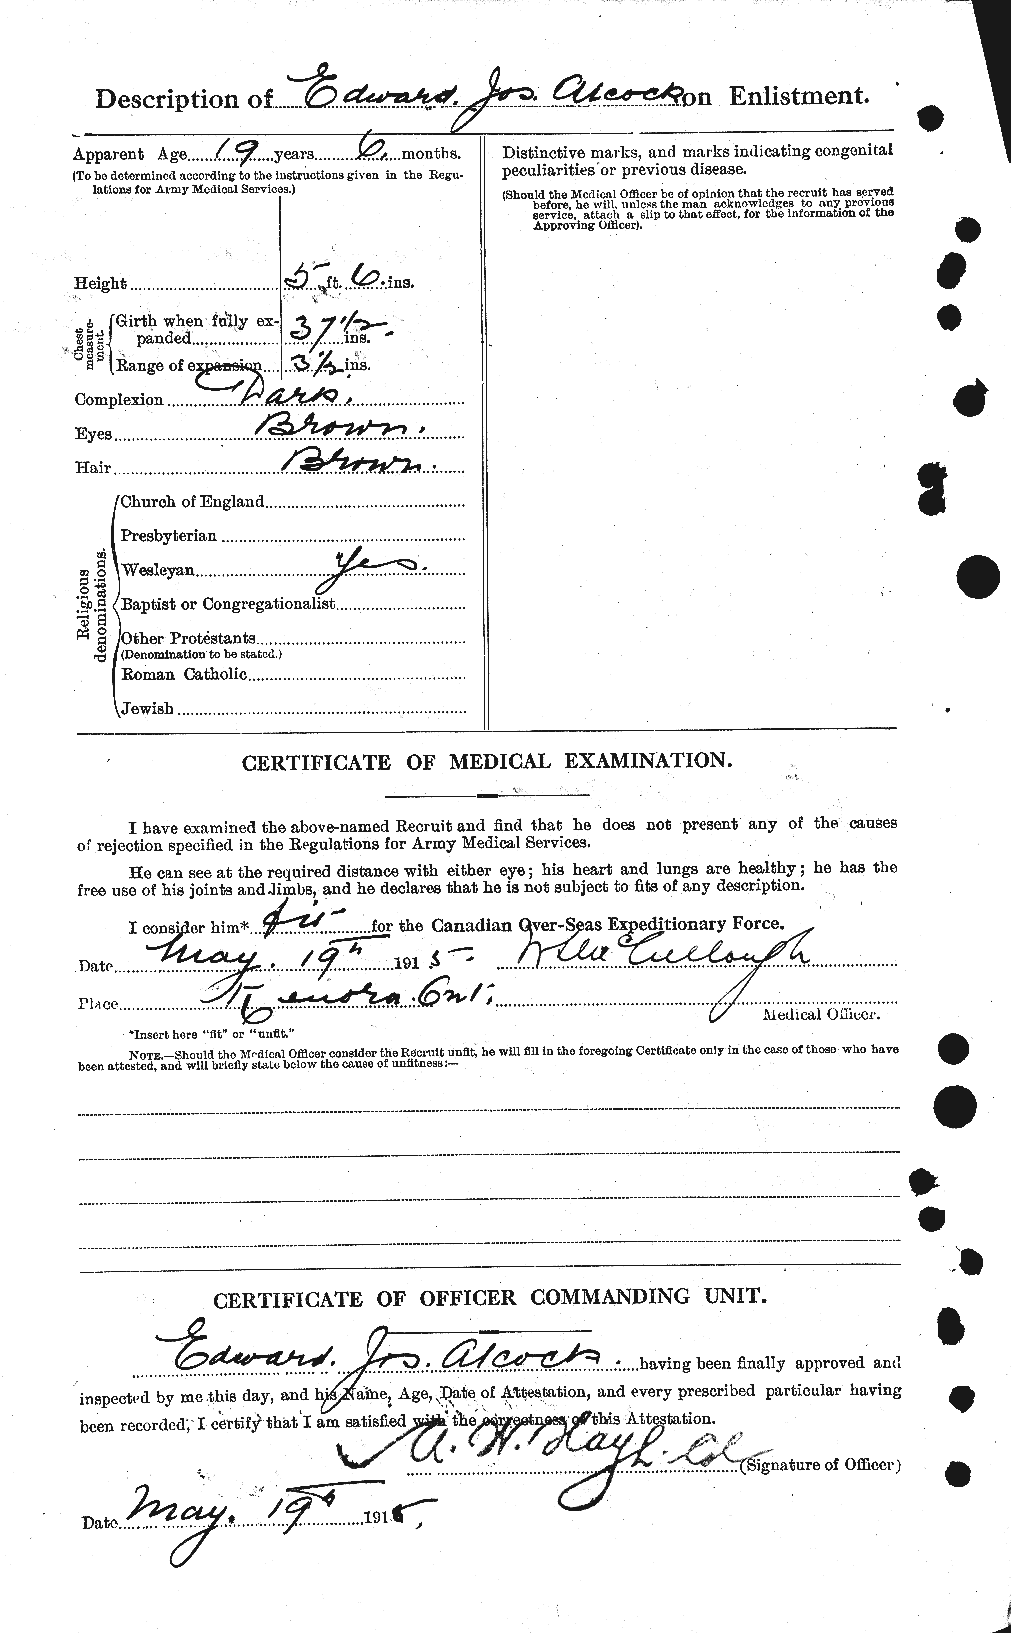 Personnel Records of the First World War - CEF 204738b